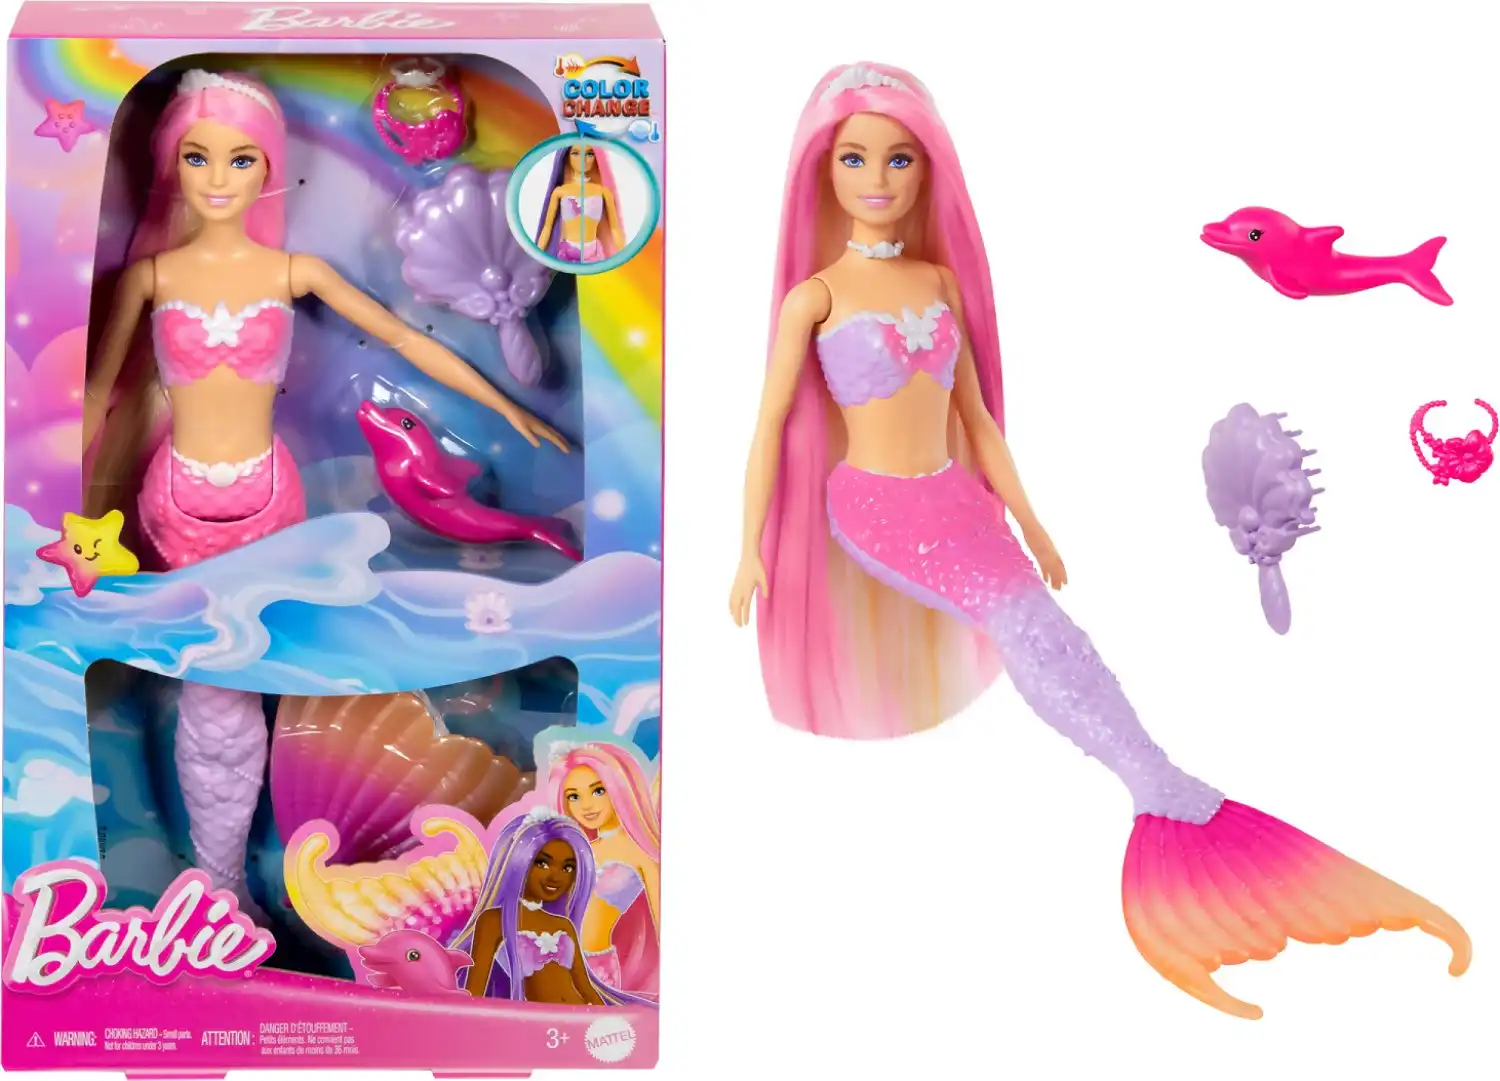 Barbie - A Touch Of Magic Malibu Mermaid Doll With Color Change Feature Pet Dolphin And Accessories - Mattel